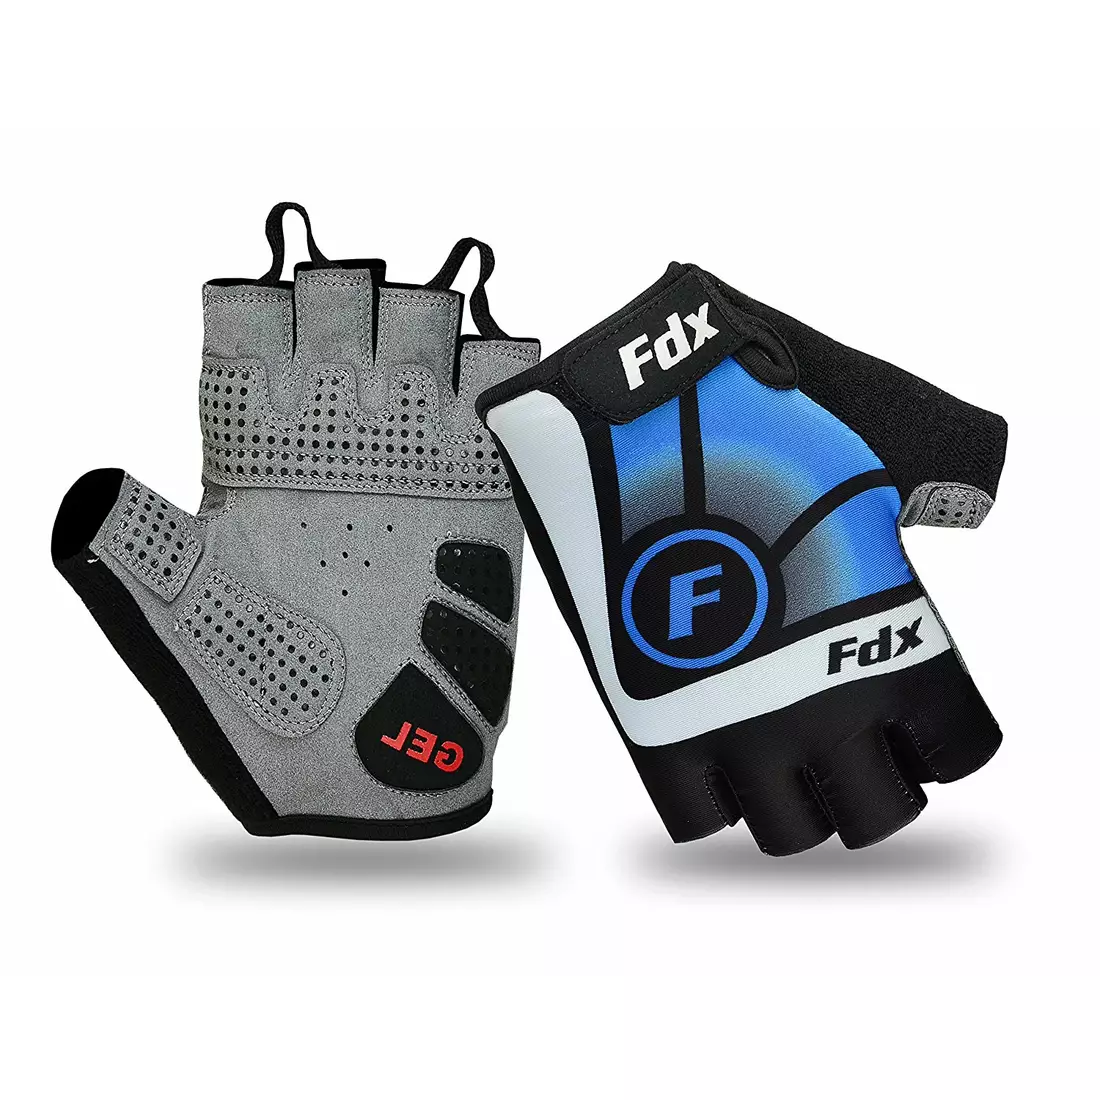 FDX 1020 cycling gloves blue